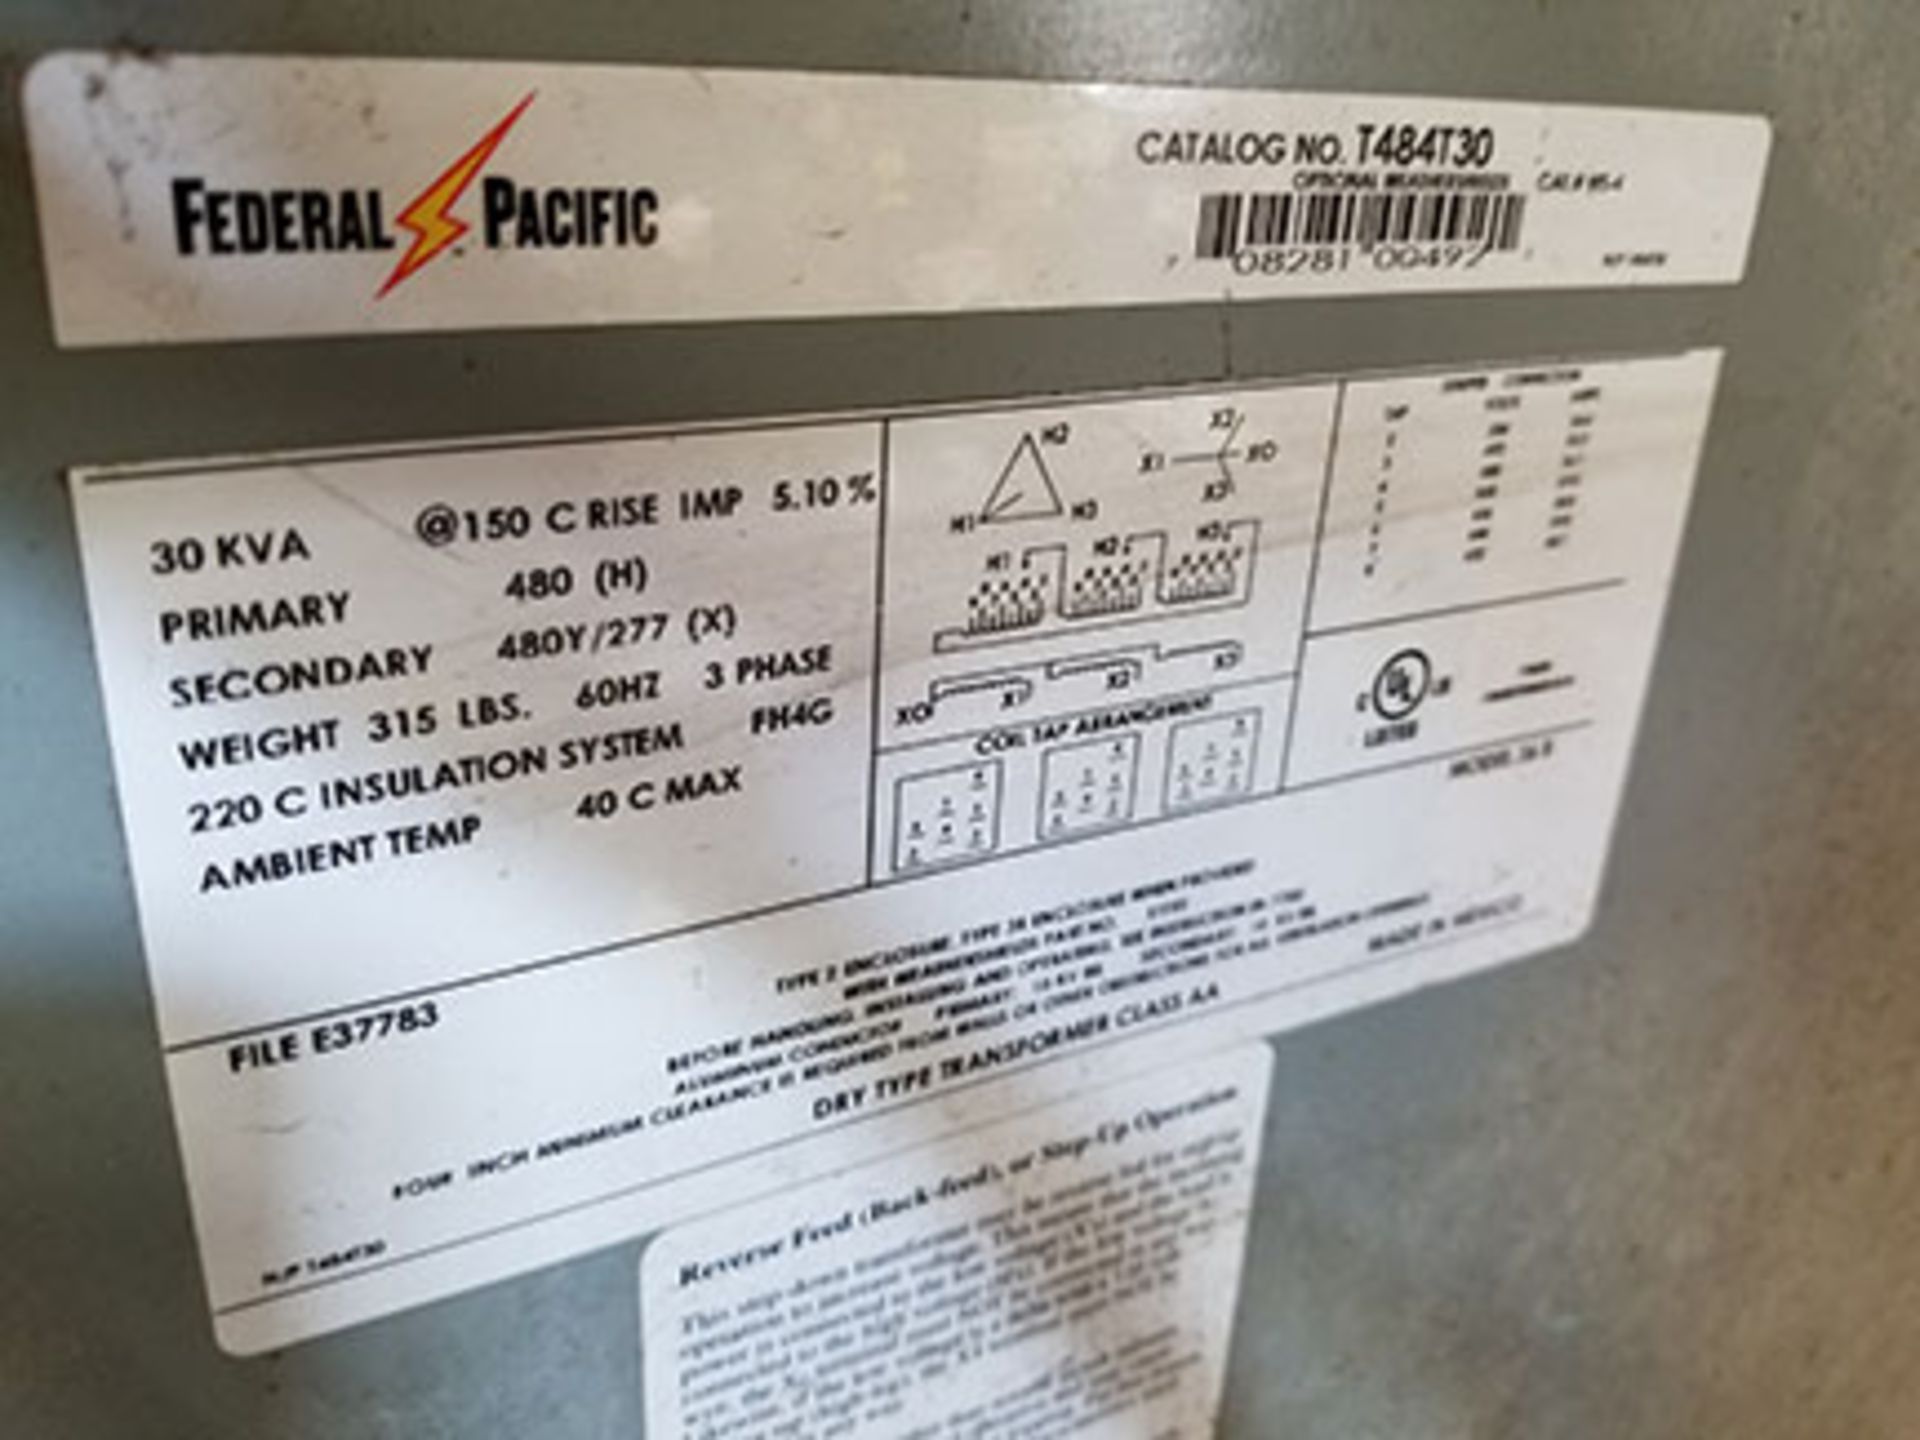 FEDERAL PACIFIC 30KVA DRY TYPE TRANSFORMER, 3 PHASE, 60HZ, MODEL 36B - Image 4 of 4